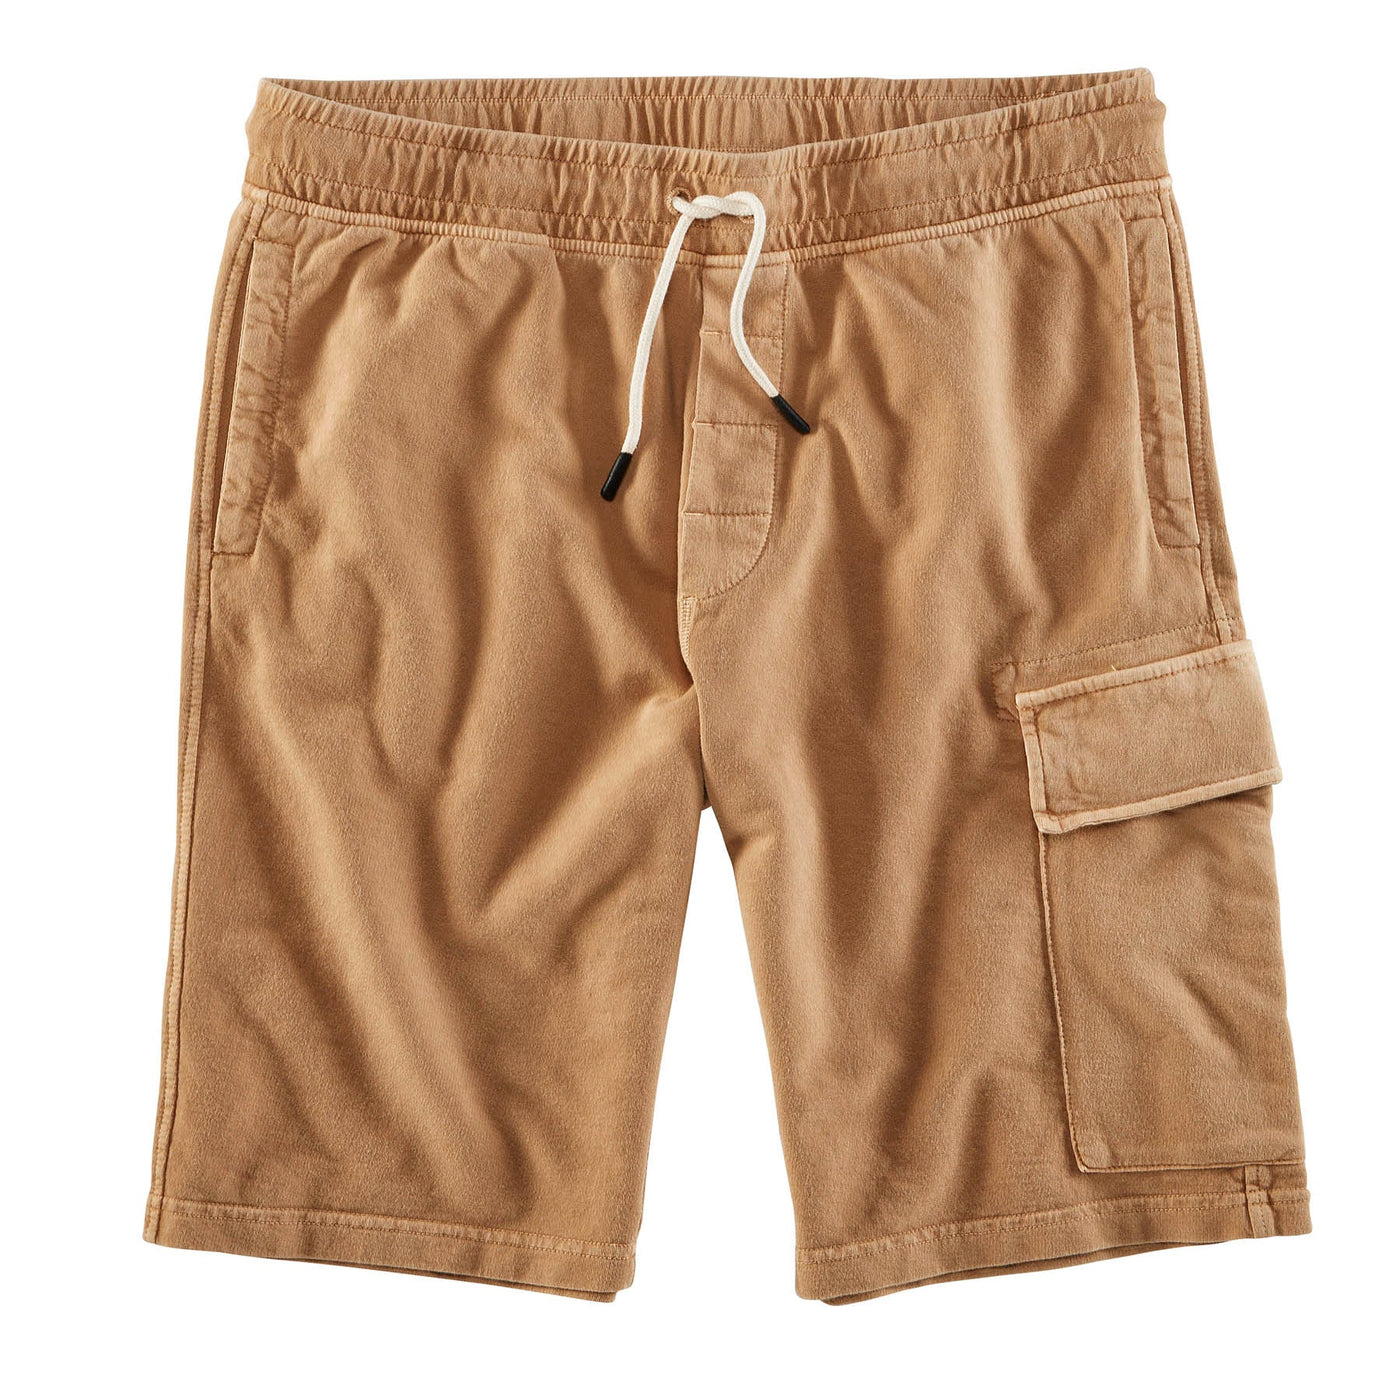 Bowery NYC Shorts Essential Toffee